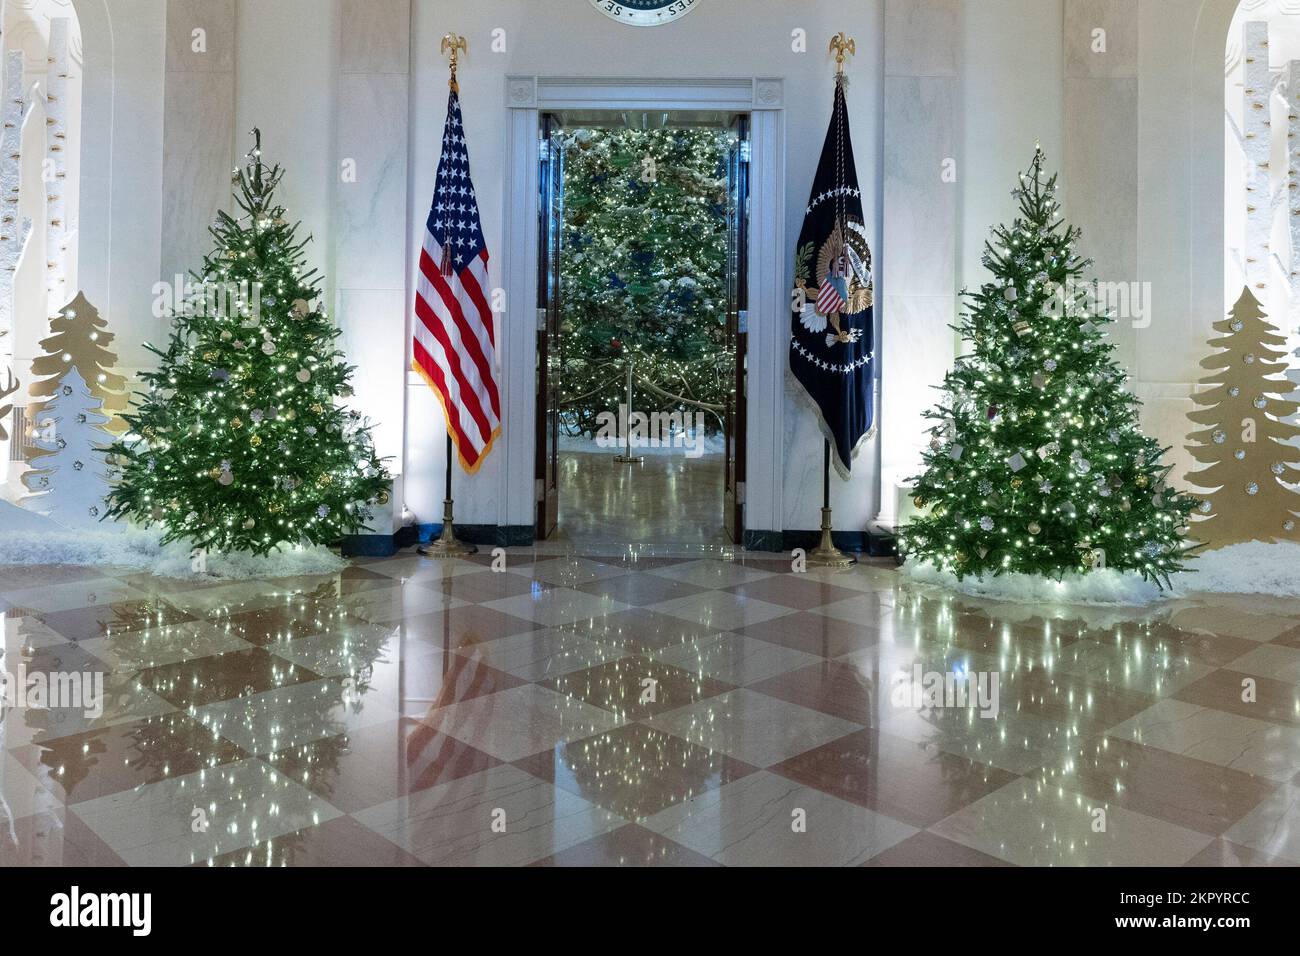 https://c8.alamy.com/comp/2KPYRCC/the-2022-white-house-christmas-tree-is-seen-in-the-blue-room-from-the-grand-foyer-as-the-2002-white-house-decorations-are-previewed-in-the-white-house-in-washington-dc-on-monday-november-28-2022-this-years-holiday-theme-is-we-the-people-credit-chris-kleponiscnp-2KPYRCC.jpg